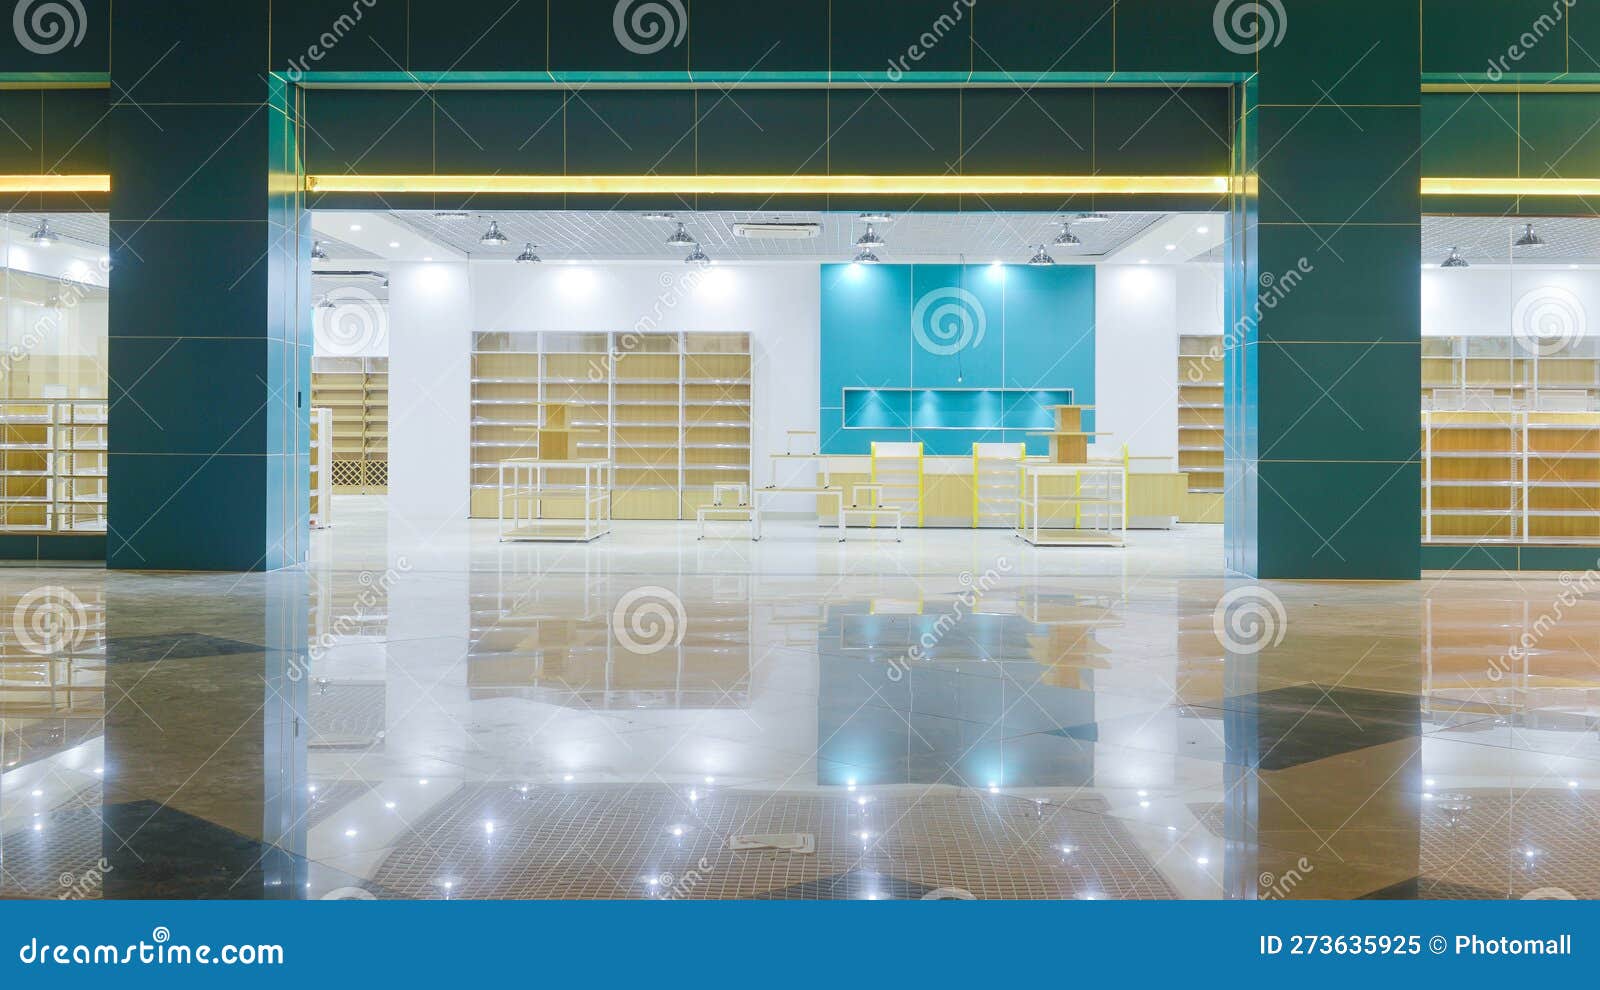 empty store front in modern commercial building